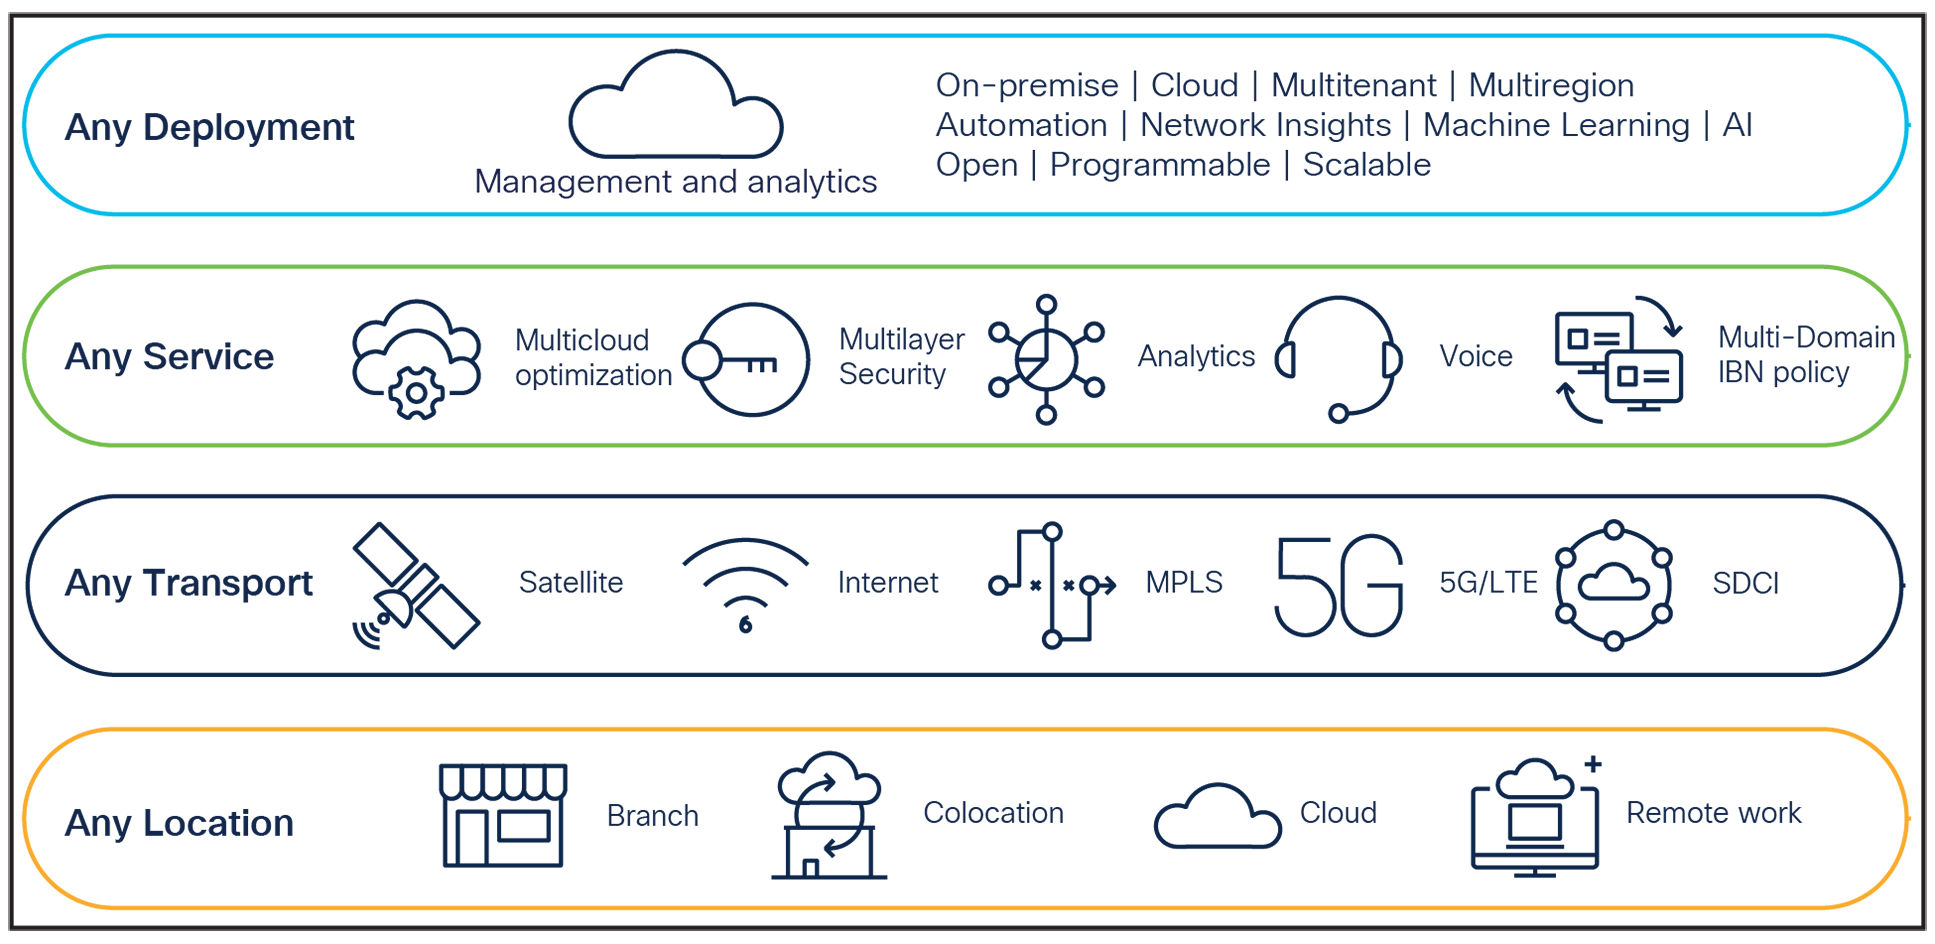 Flexible and scalable SD-WAN architecture for network transformation